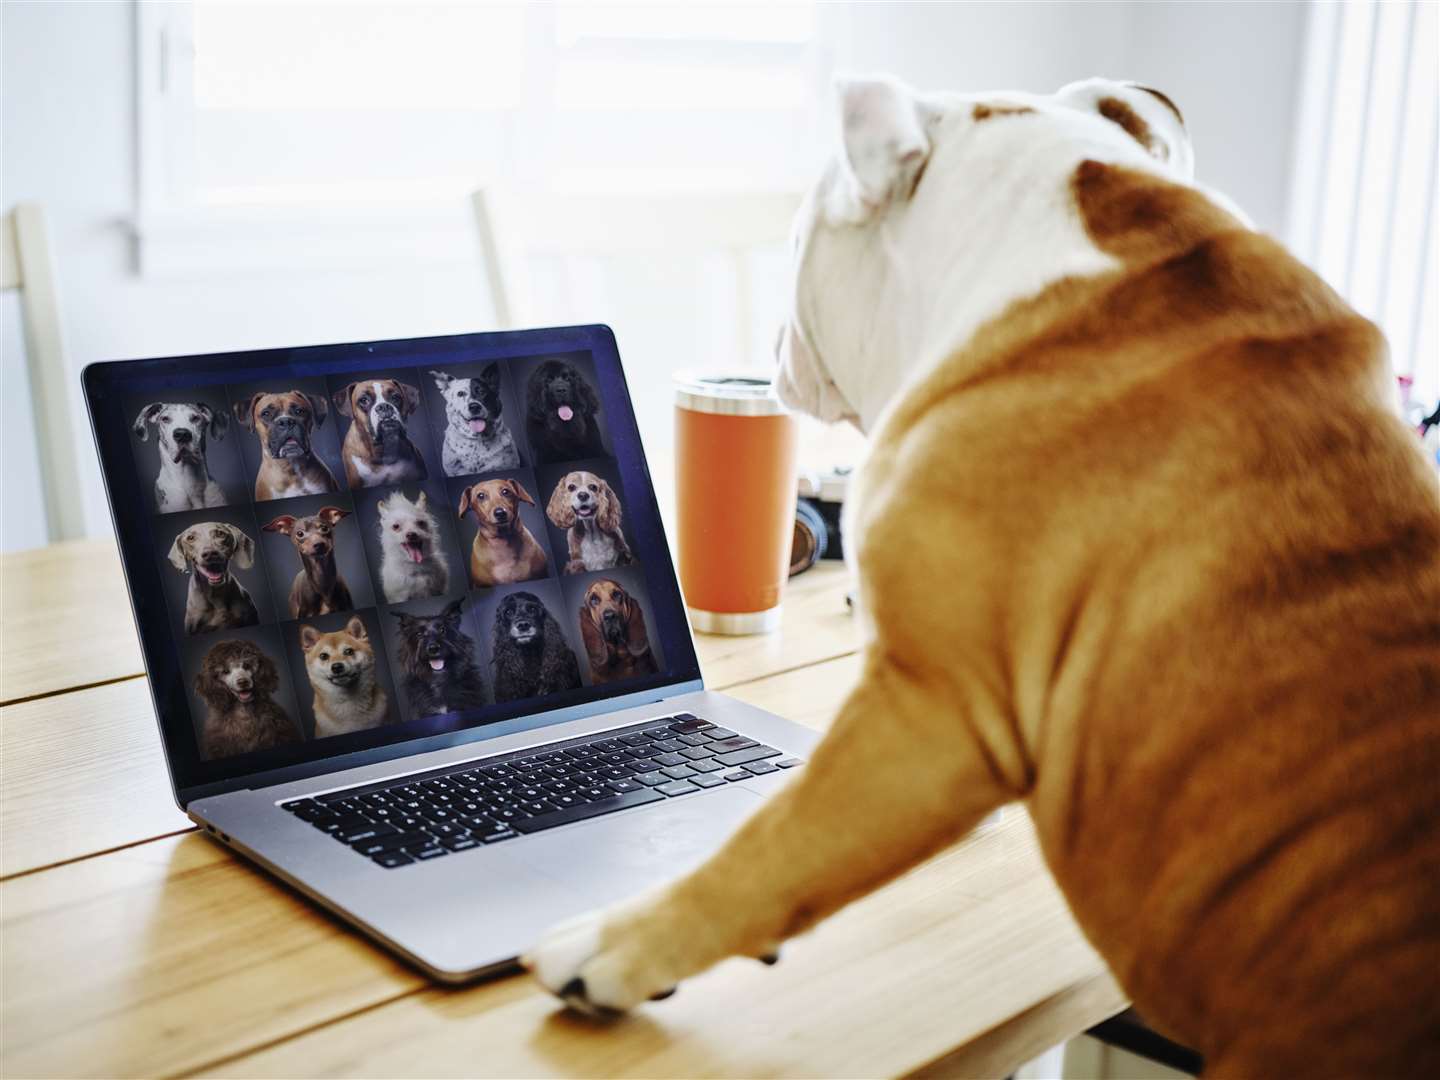 Which of our dog breeds is featured the most on photo sharing app Instagram?